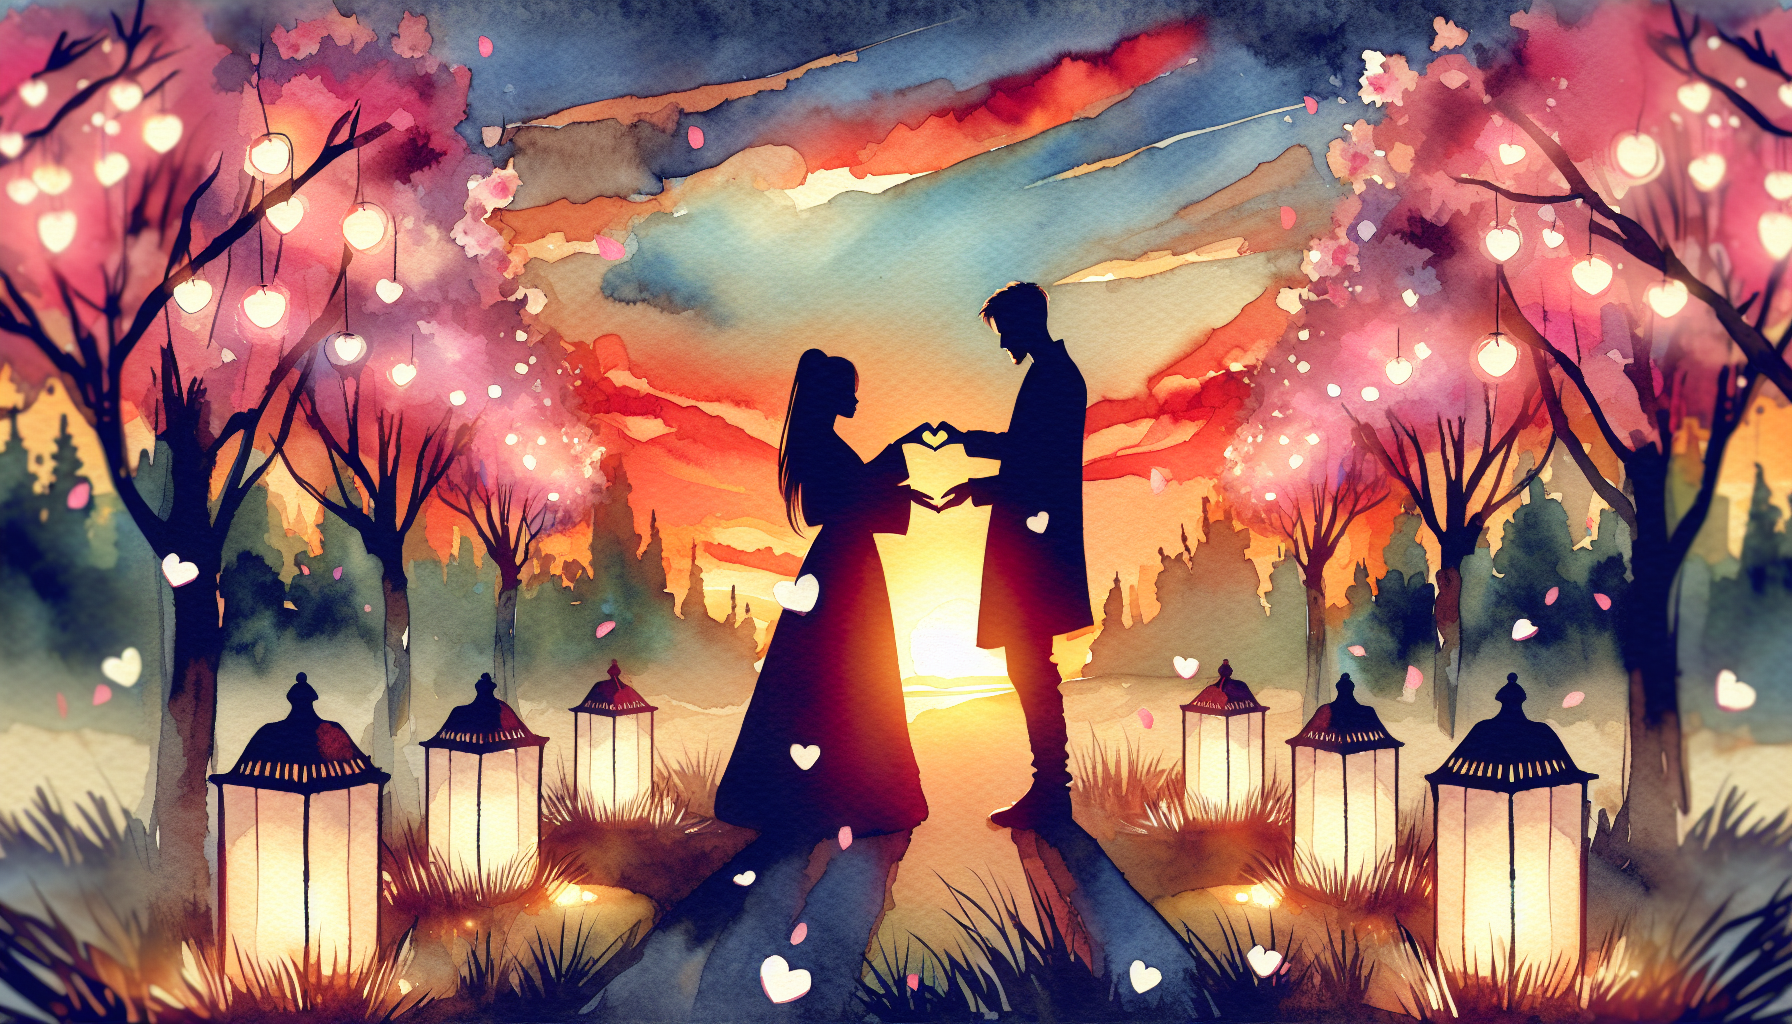 An idyllic park scene depicted in a watercolor style, where a couple romantically shapes heart symbols with their hands against a sunset backdrop, surrounded by softly glowing lanterns and falling che